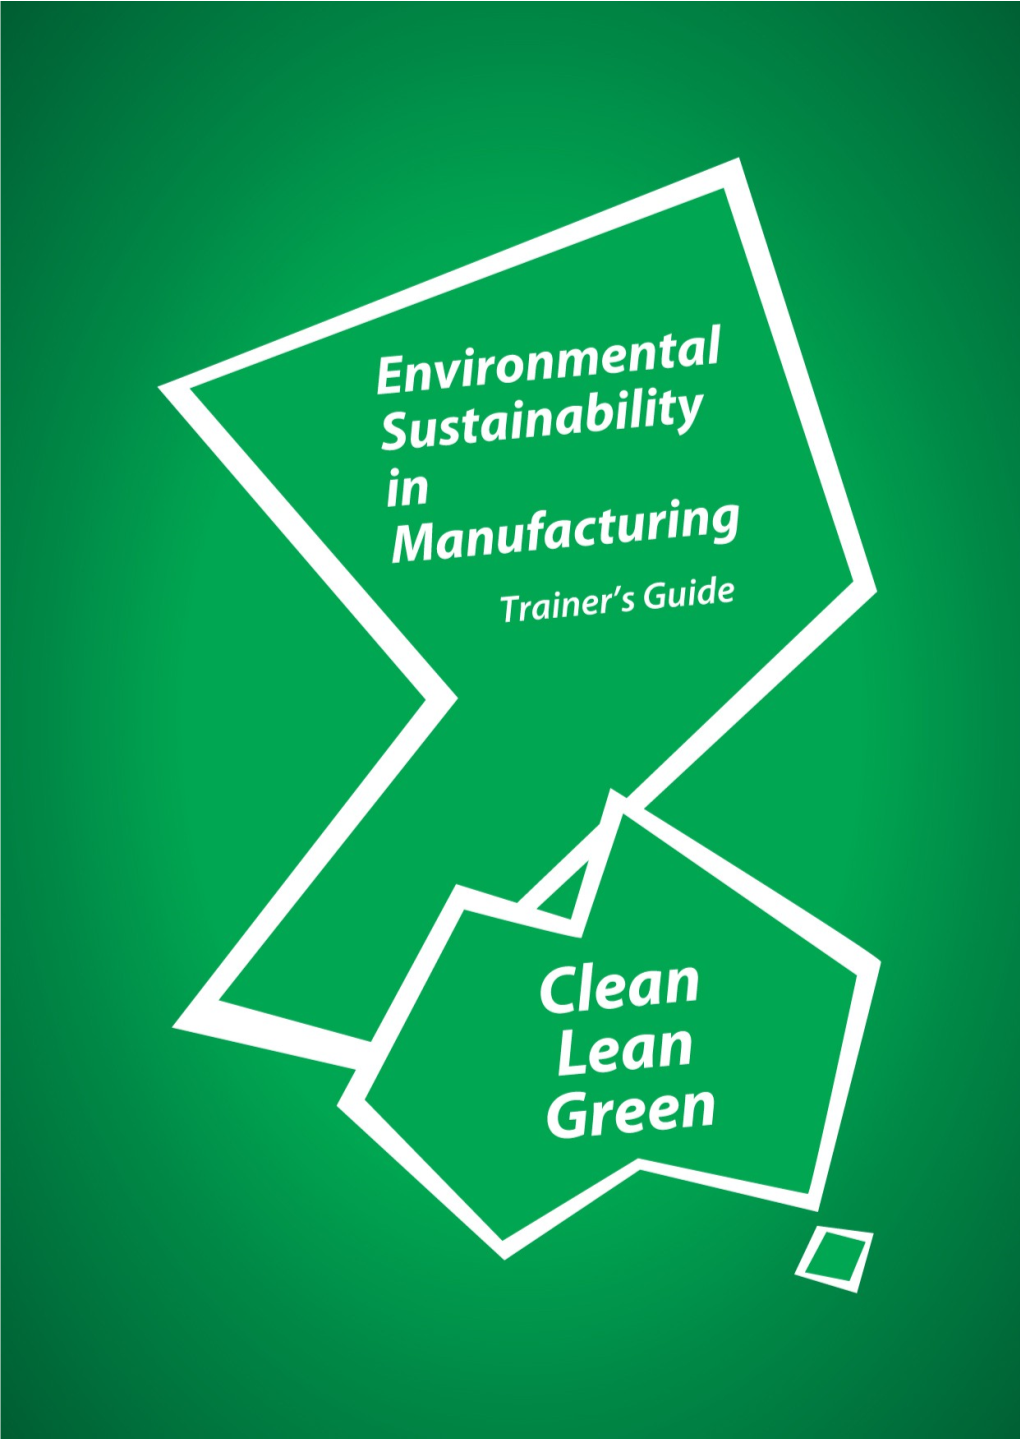 Environmential Sustainabilty in Manufacturing